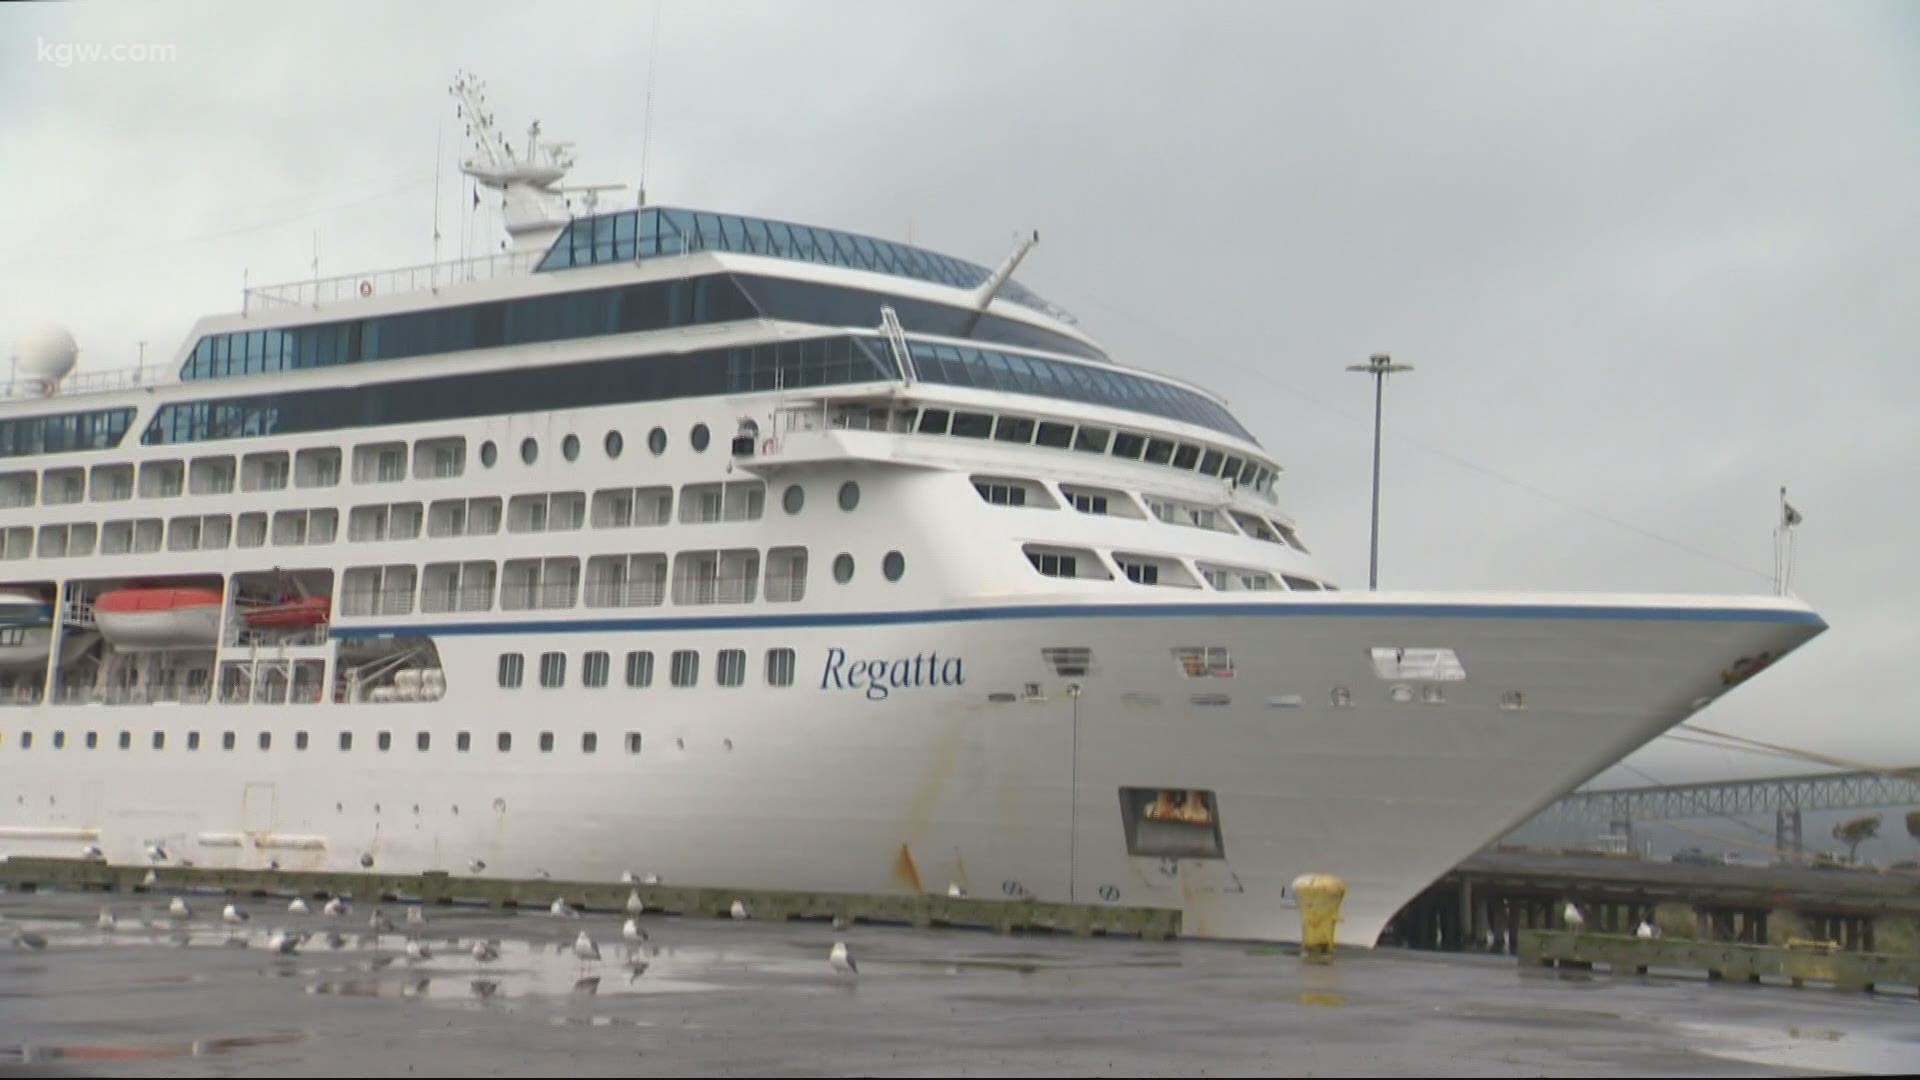 For the first time in seven months, a cruise ship docked in Astoria. But the crew is not allowed to leave the ship. Devon Haskins explains.